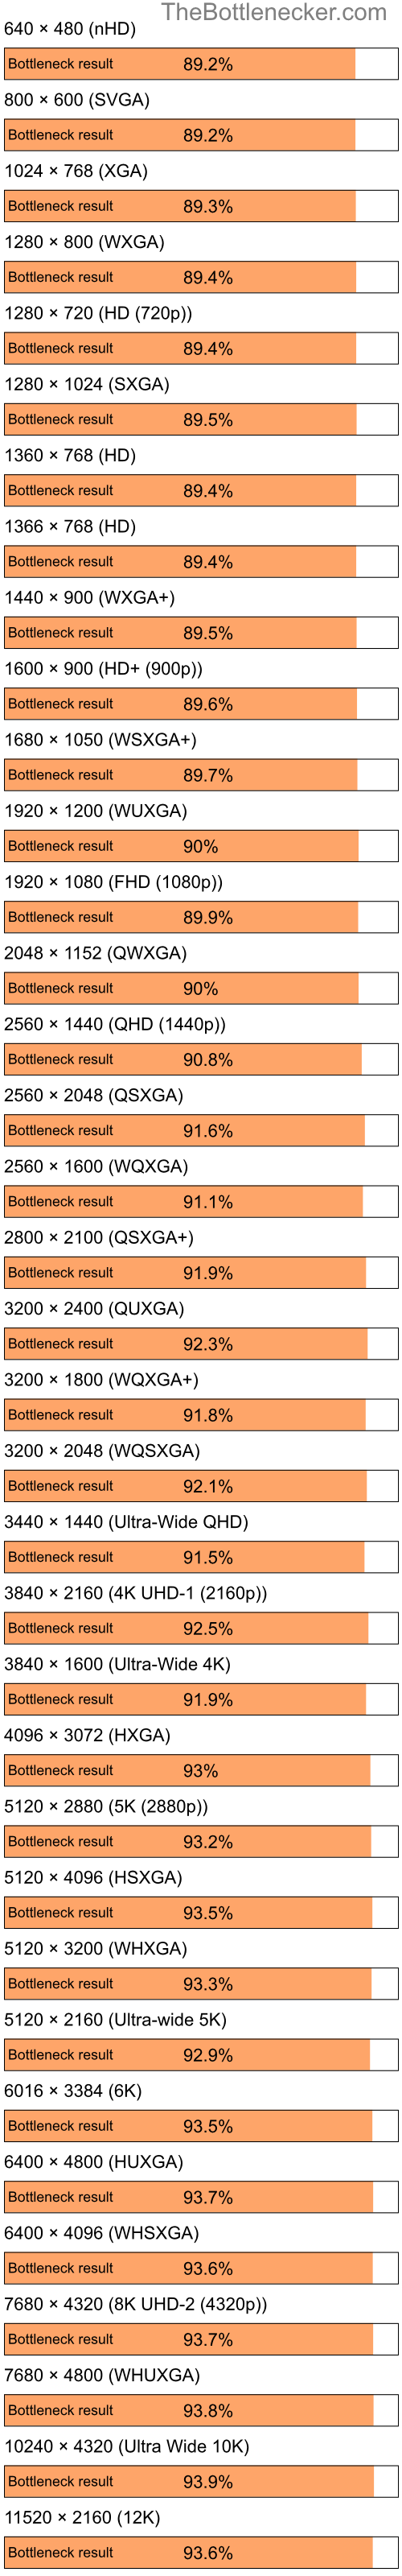 Bottleneck results by resolution for Intel Pentium 4 and NVIDIA GeForce2 MX in Processor Intense Tasks